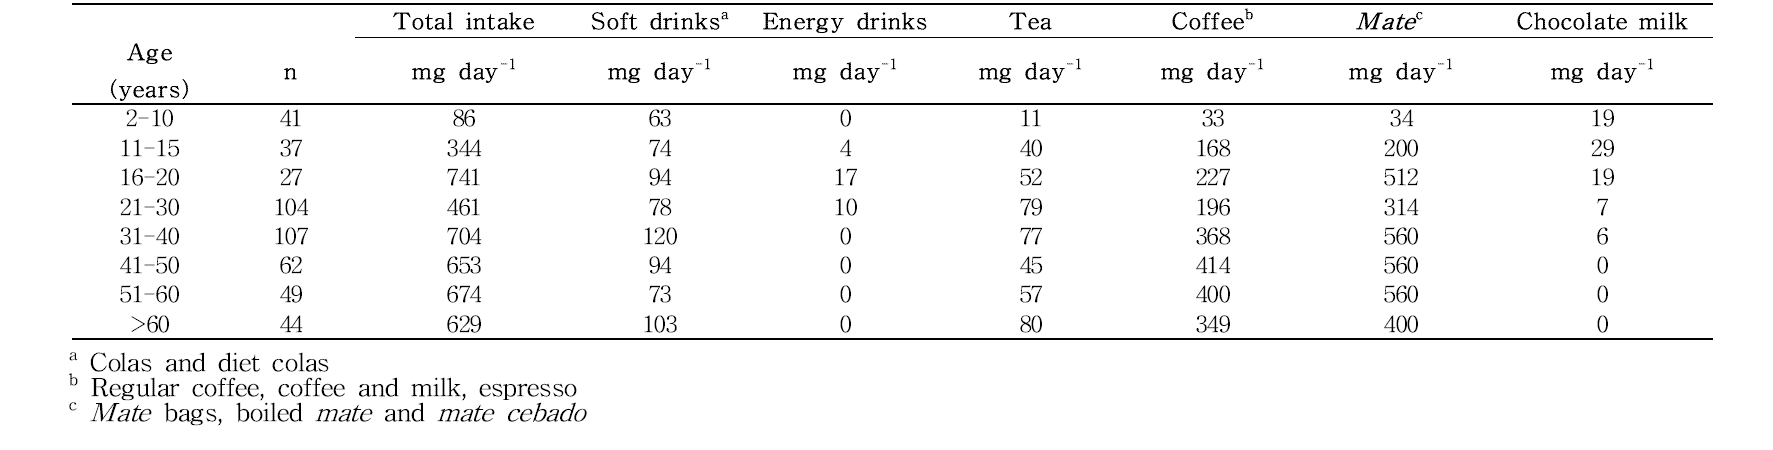 95th percentile caffeine intake by age group of the studied population